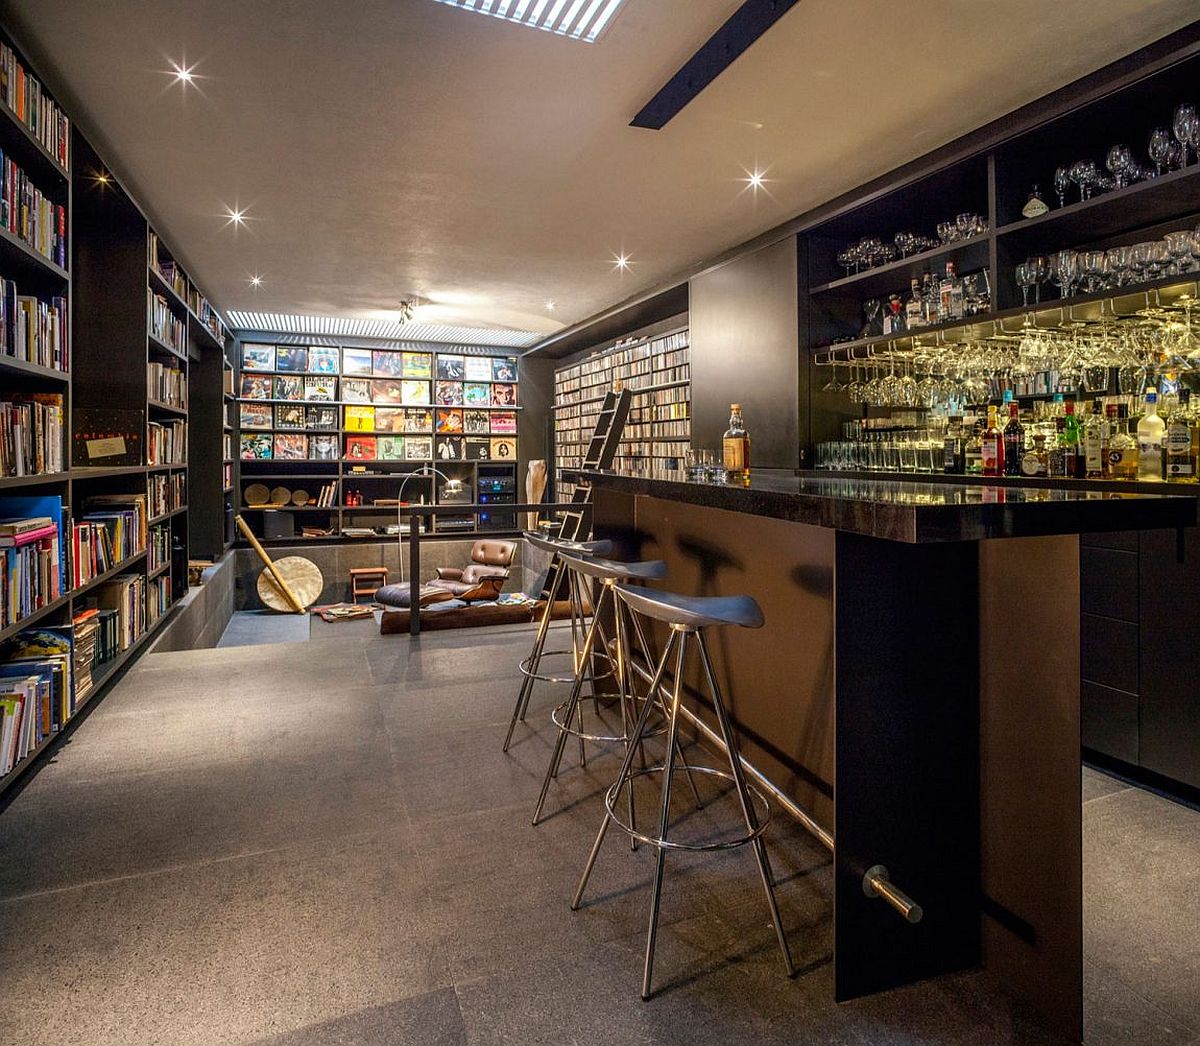 Art-work-wall-of-books-and-a-home-bar-shape-an-intimate-interior.jpg